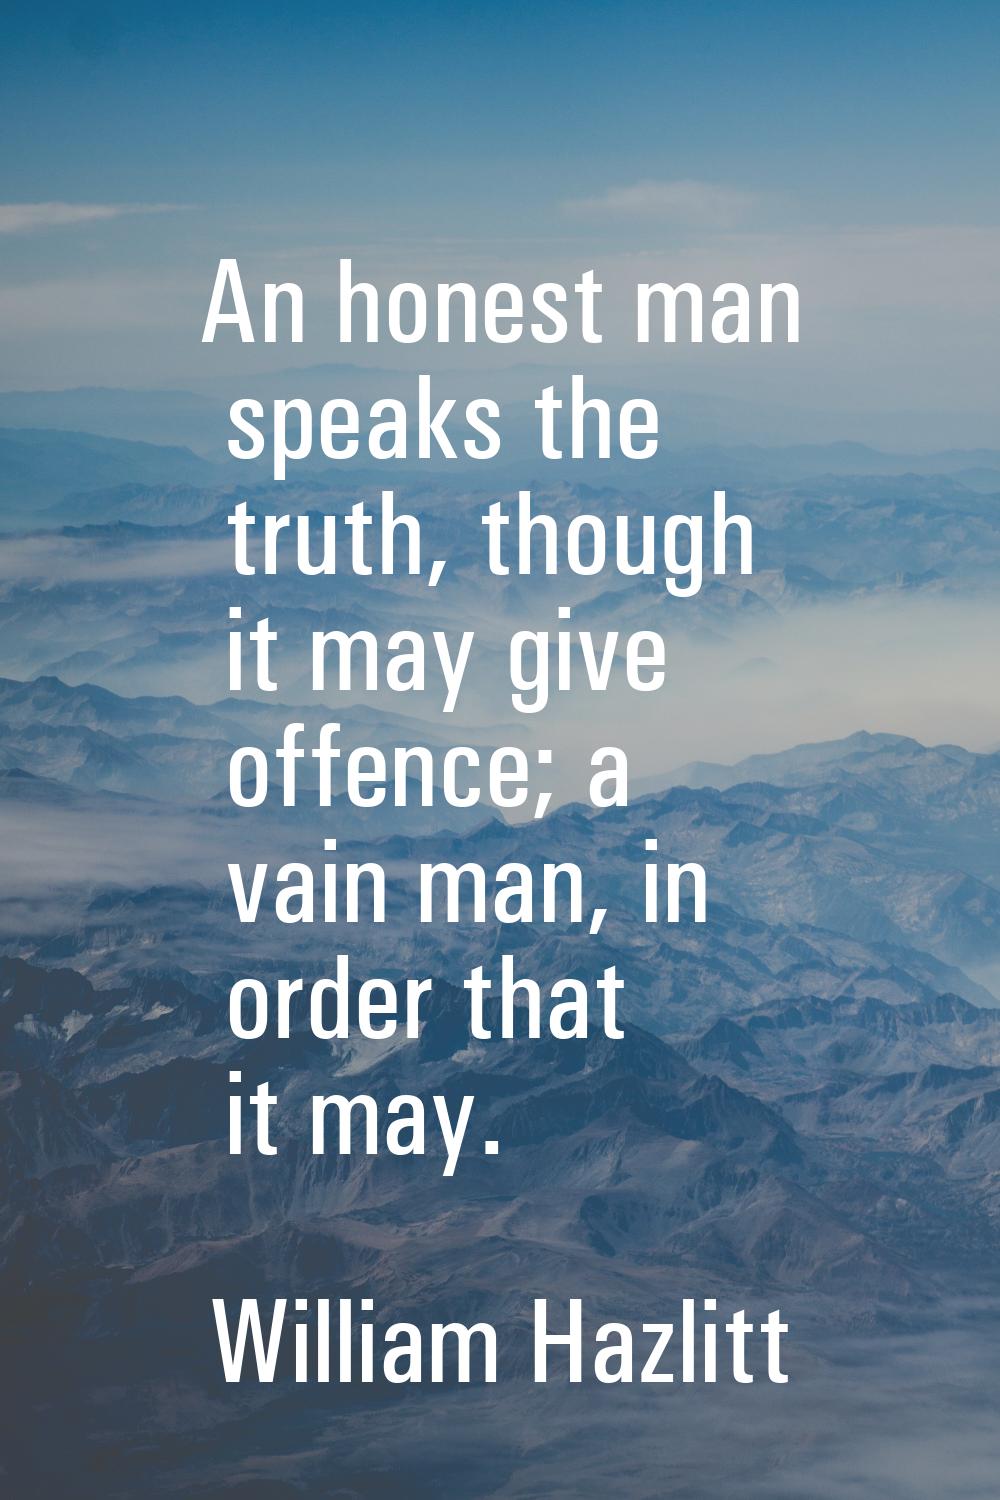 An honest man speaks the truth, though it may give offence; a vain man, in order that it may.